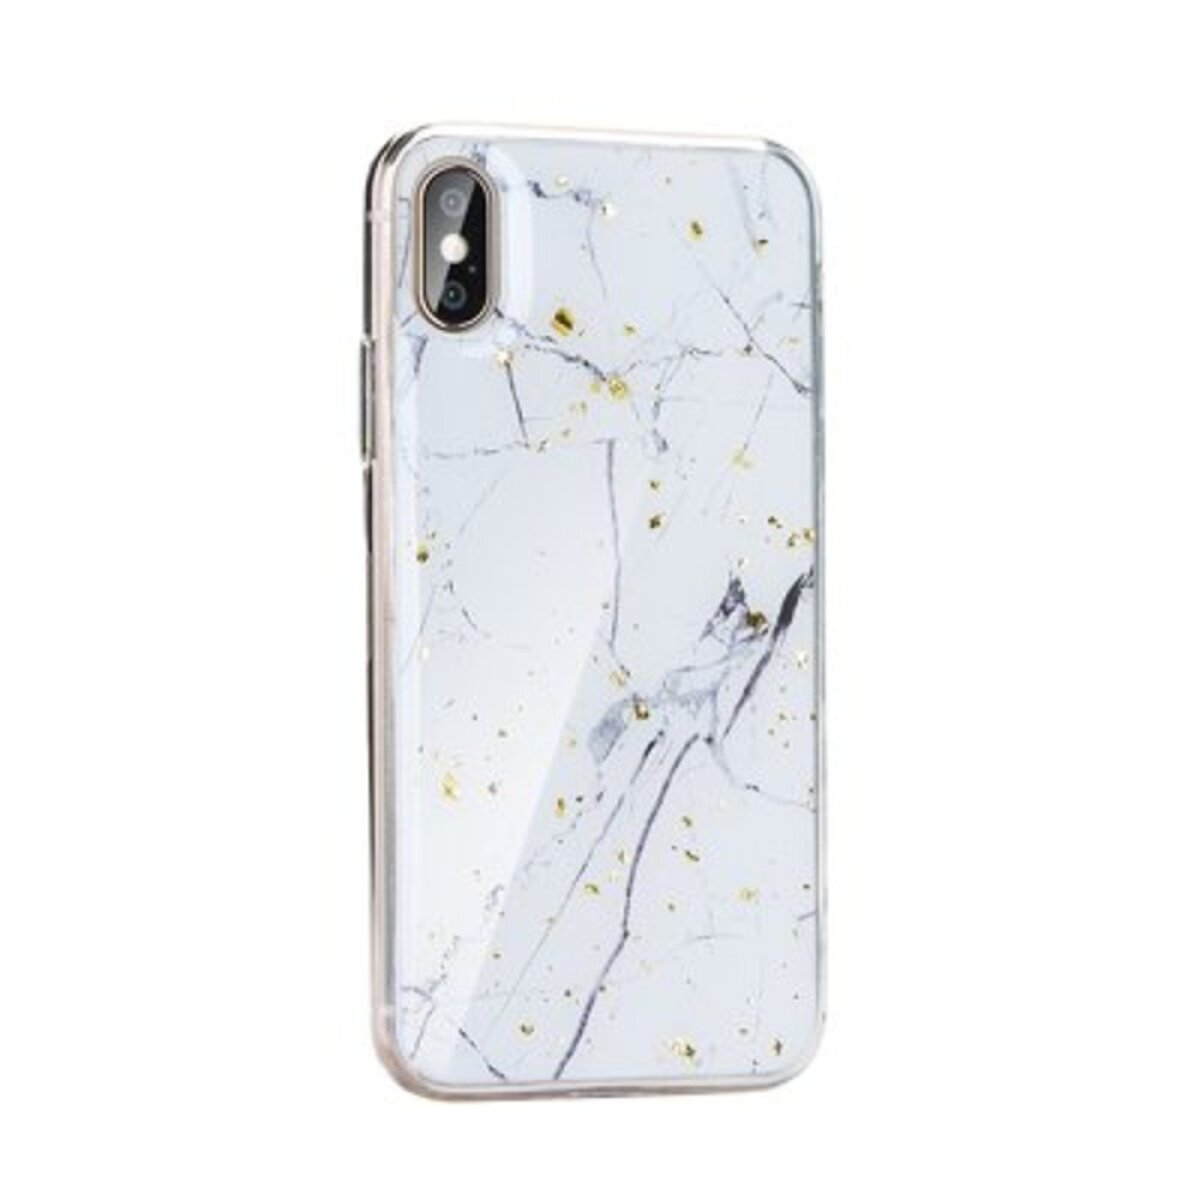 FORCELL Huawei, Y7 Bookcover, 2019 Y7 Not Case 2019, available design MARBLE 1,